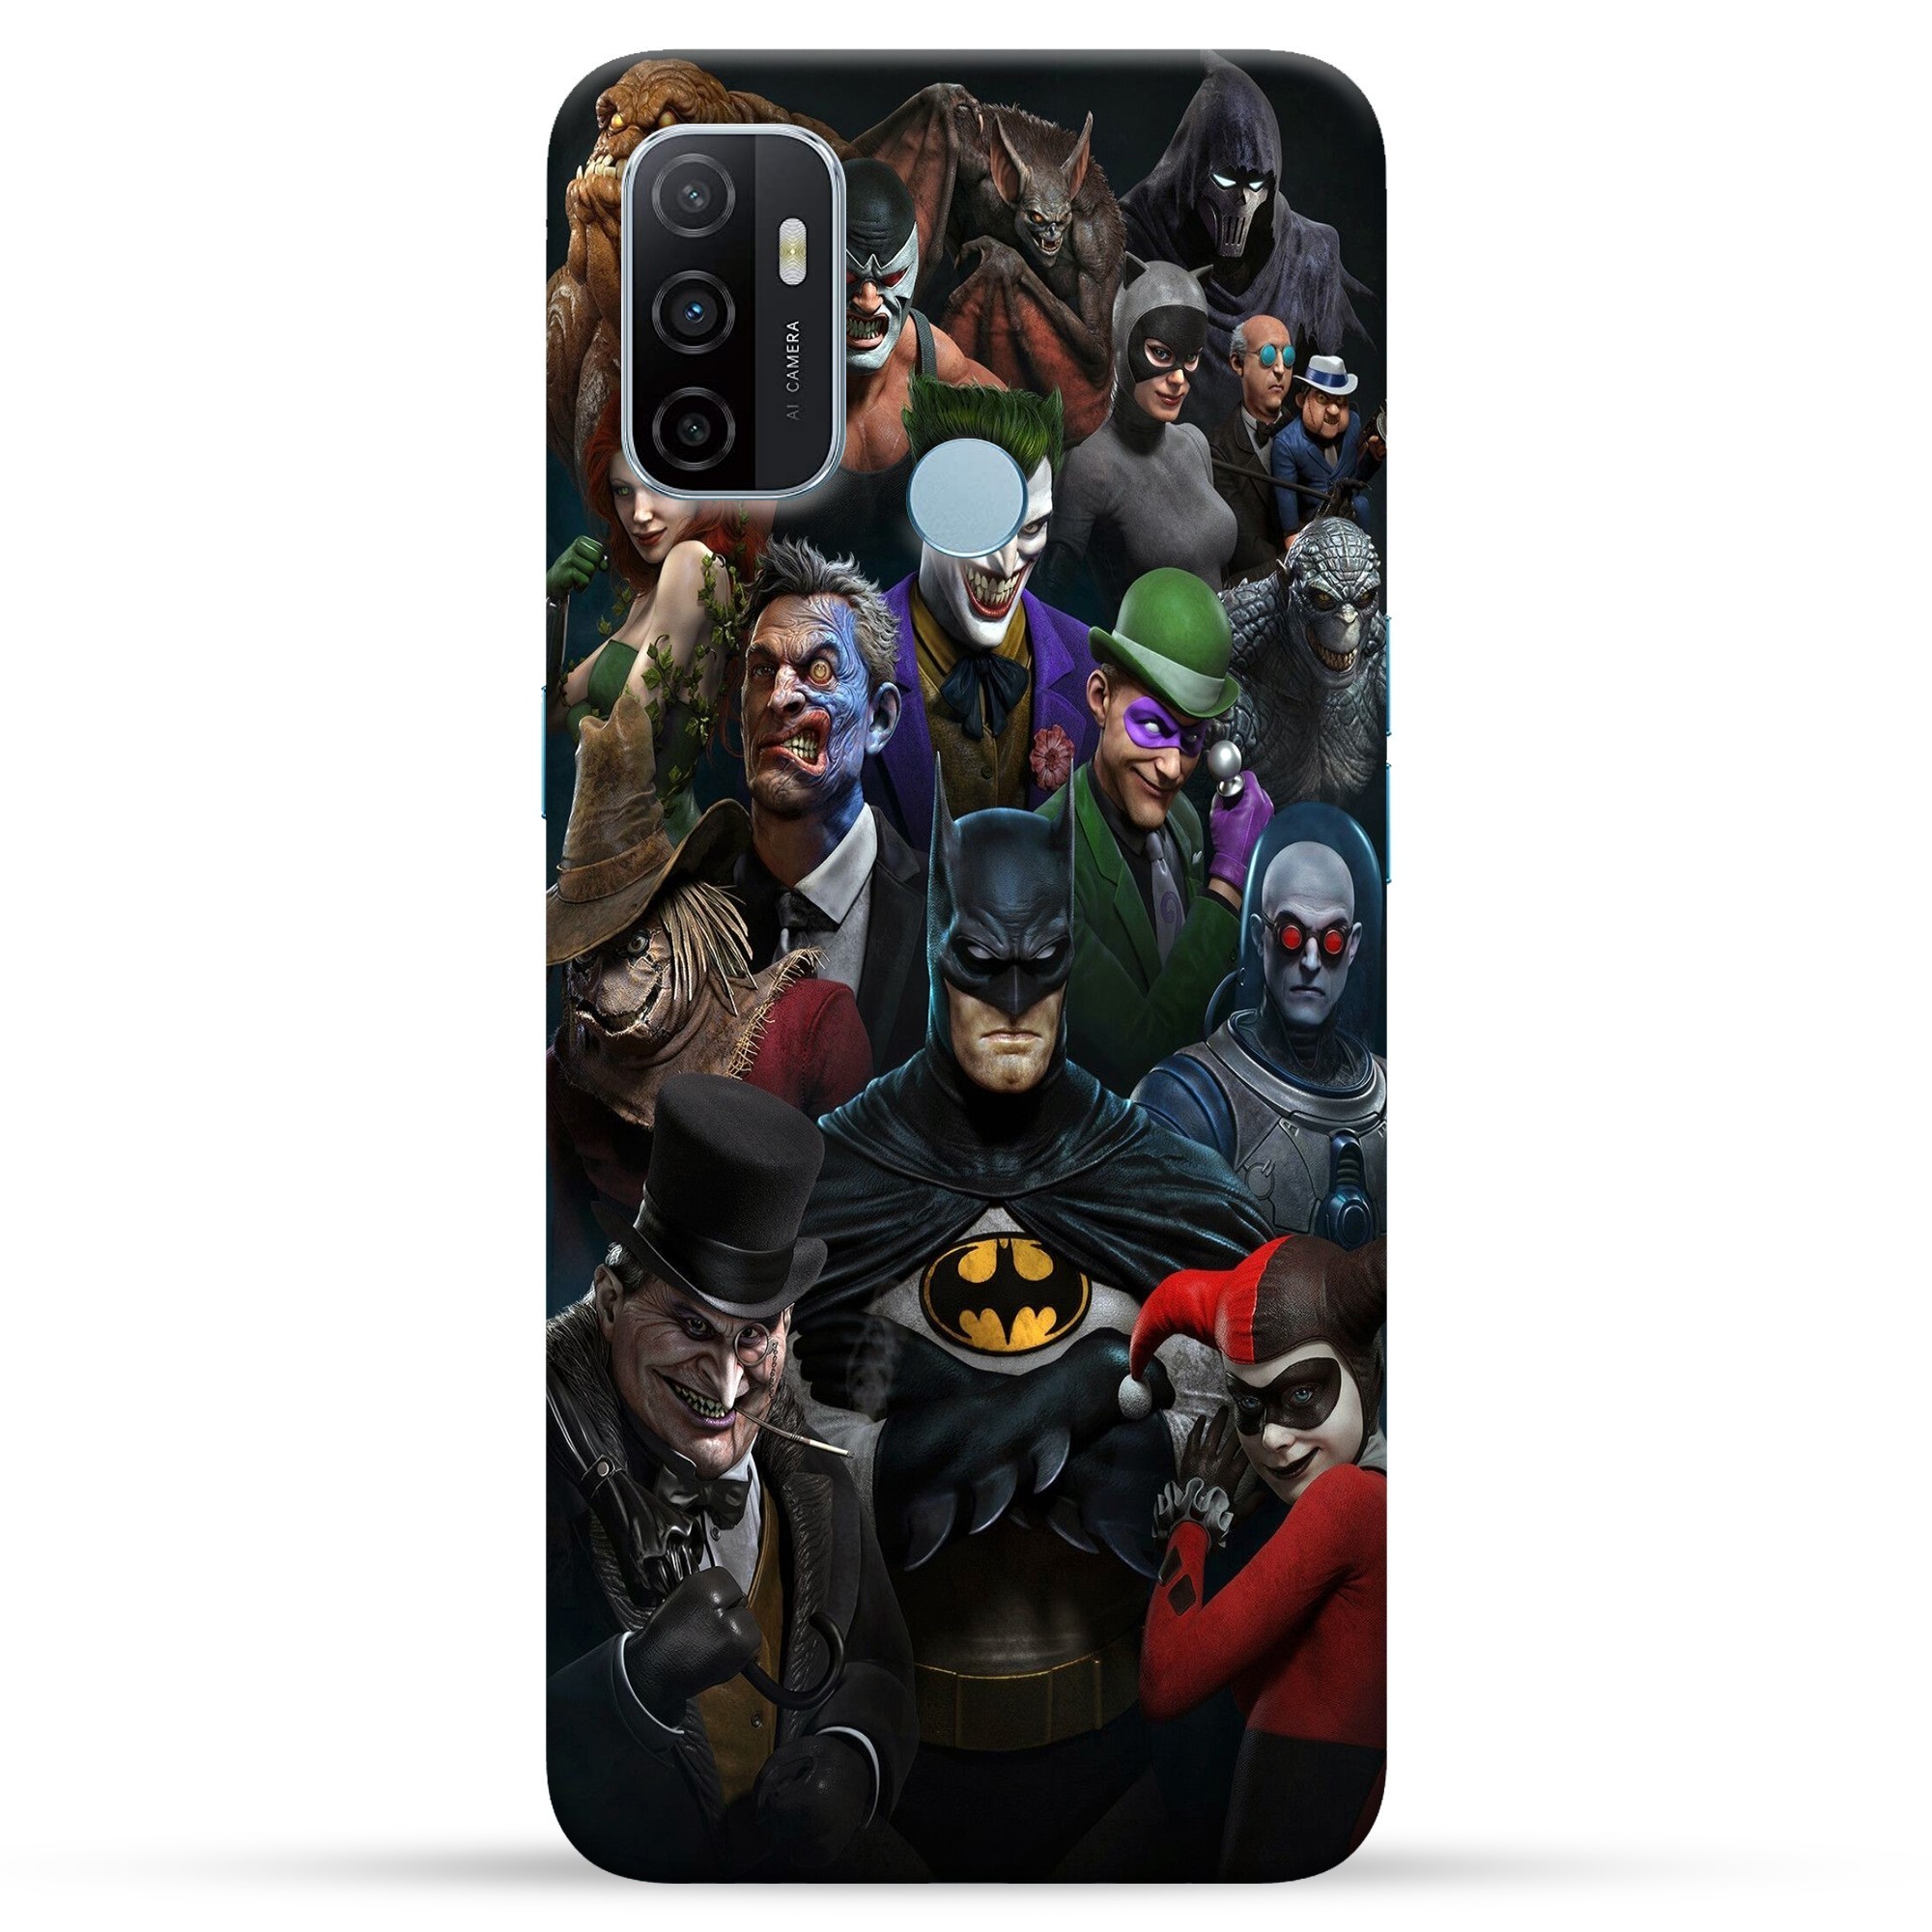 Shop Oppo A53 Back Covers  Cases at CustomEra